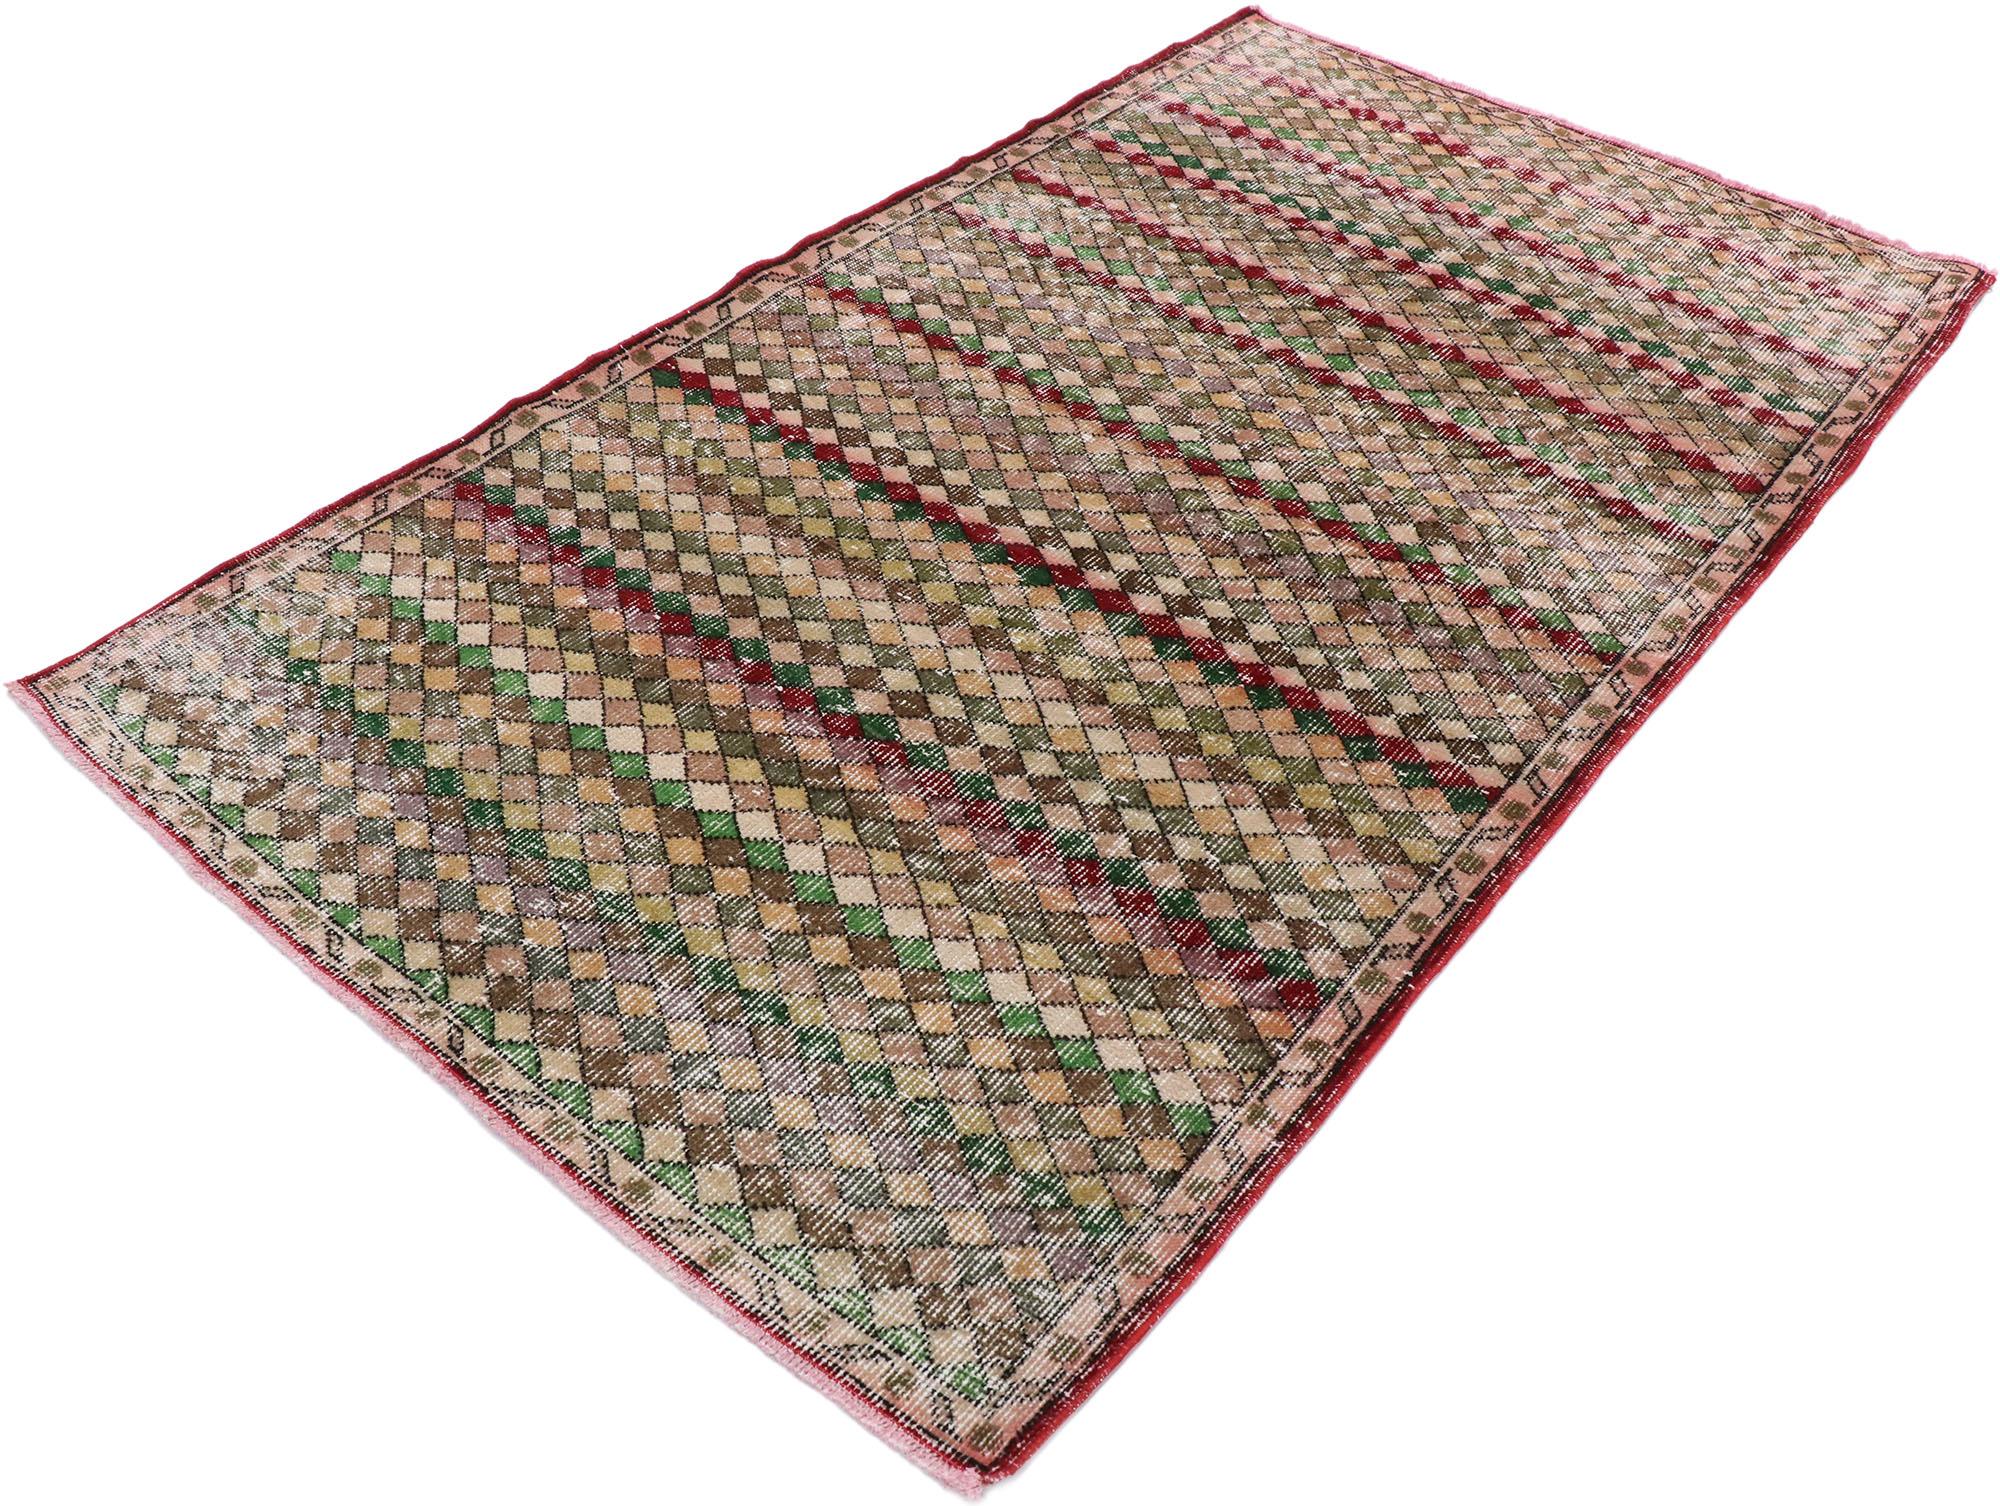 53343, distressed vintage Turkish Sivas rug with Rustic Mid-Century Modern style. This hand knotted wool distressed vintage Turkish Sivas rug features an all-over checkered stripe pattern comprised of rows of multicolored diamonds. Each row of